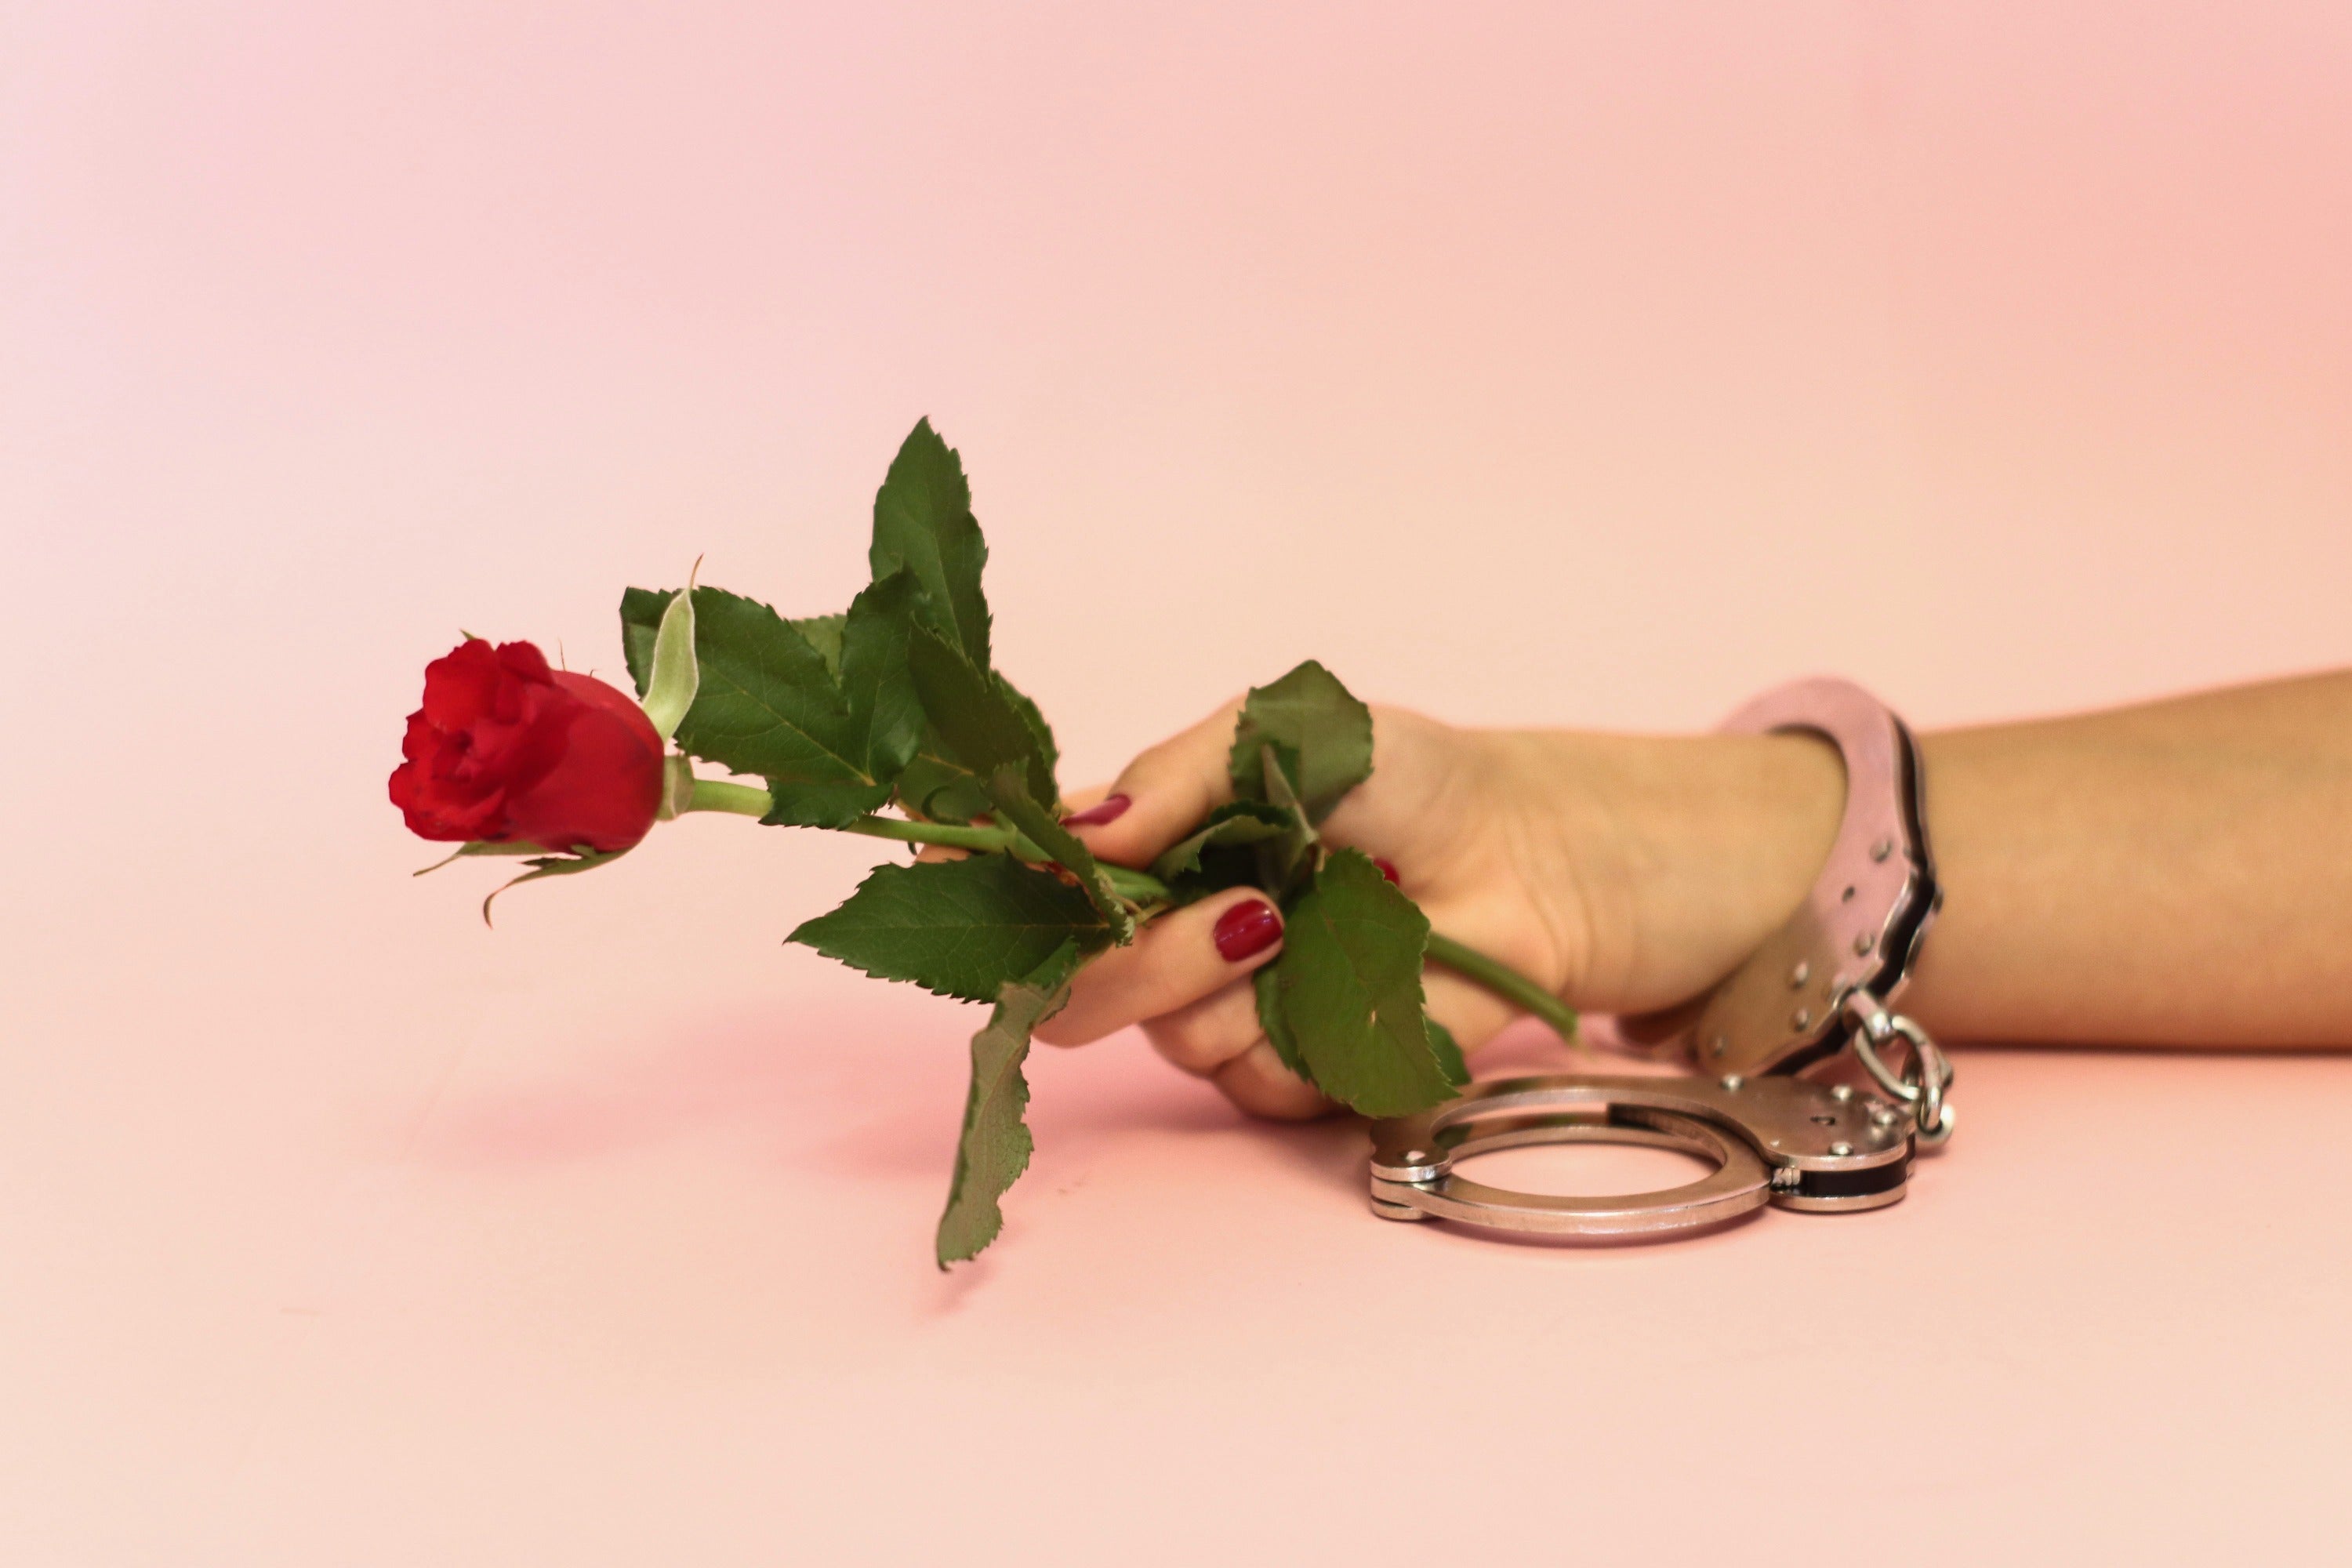 Woman's hand holding a red rose and wearing hand cuff